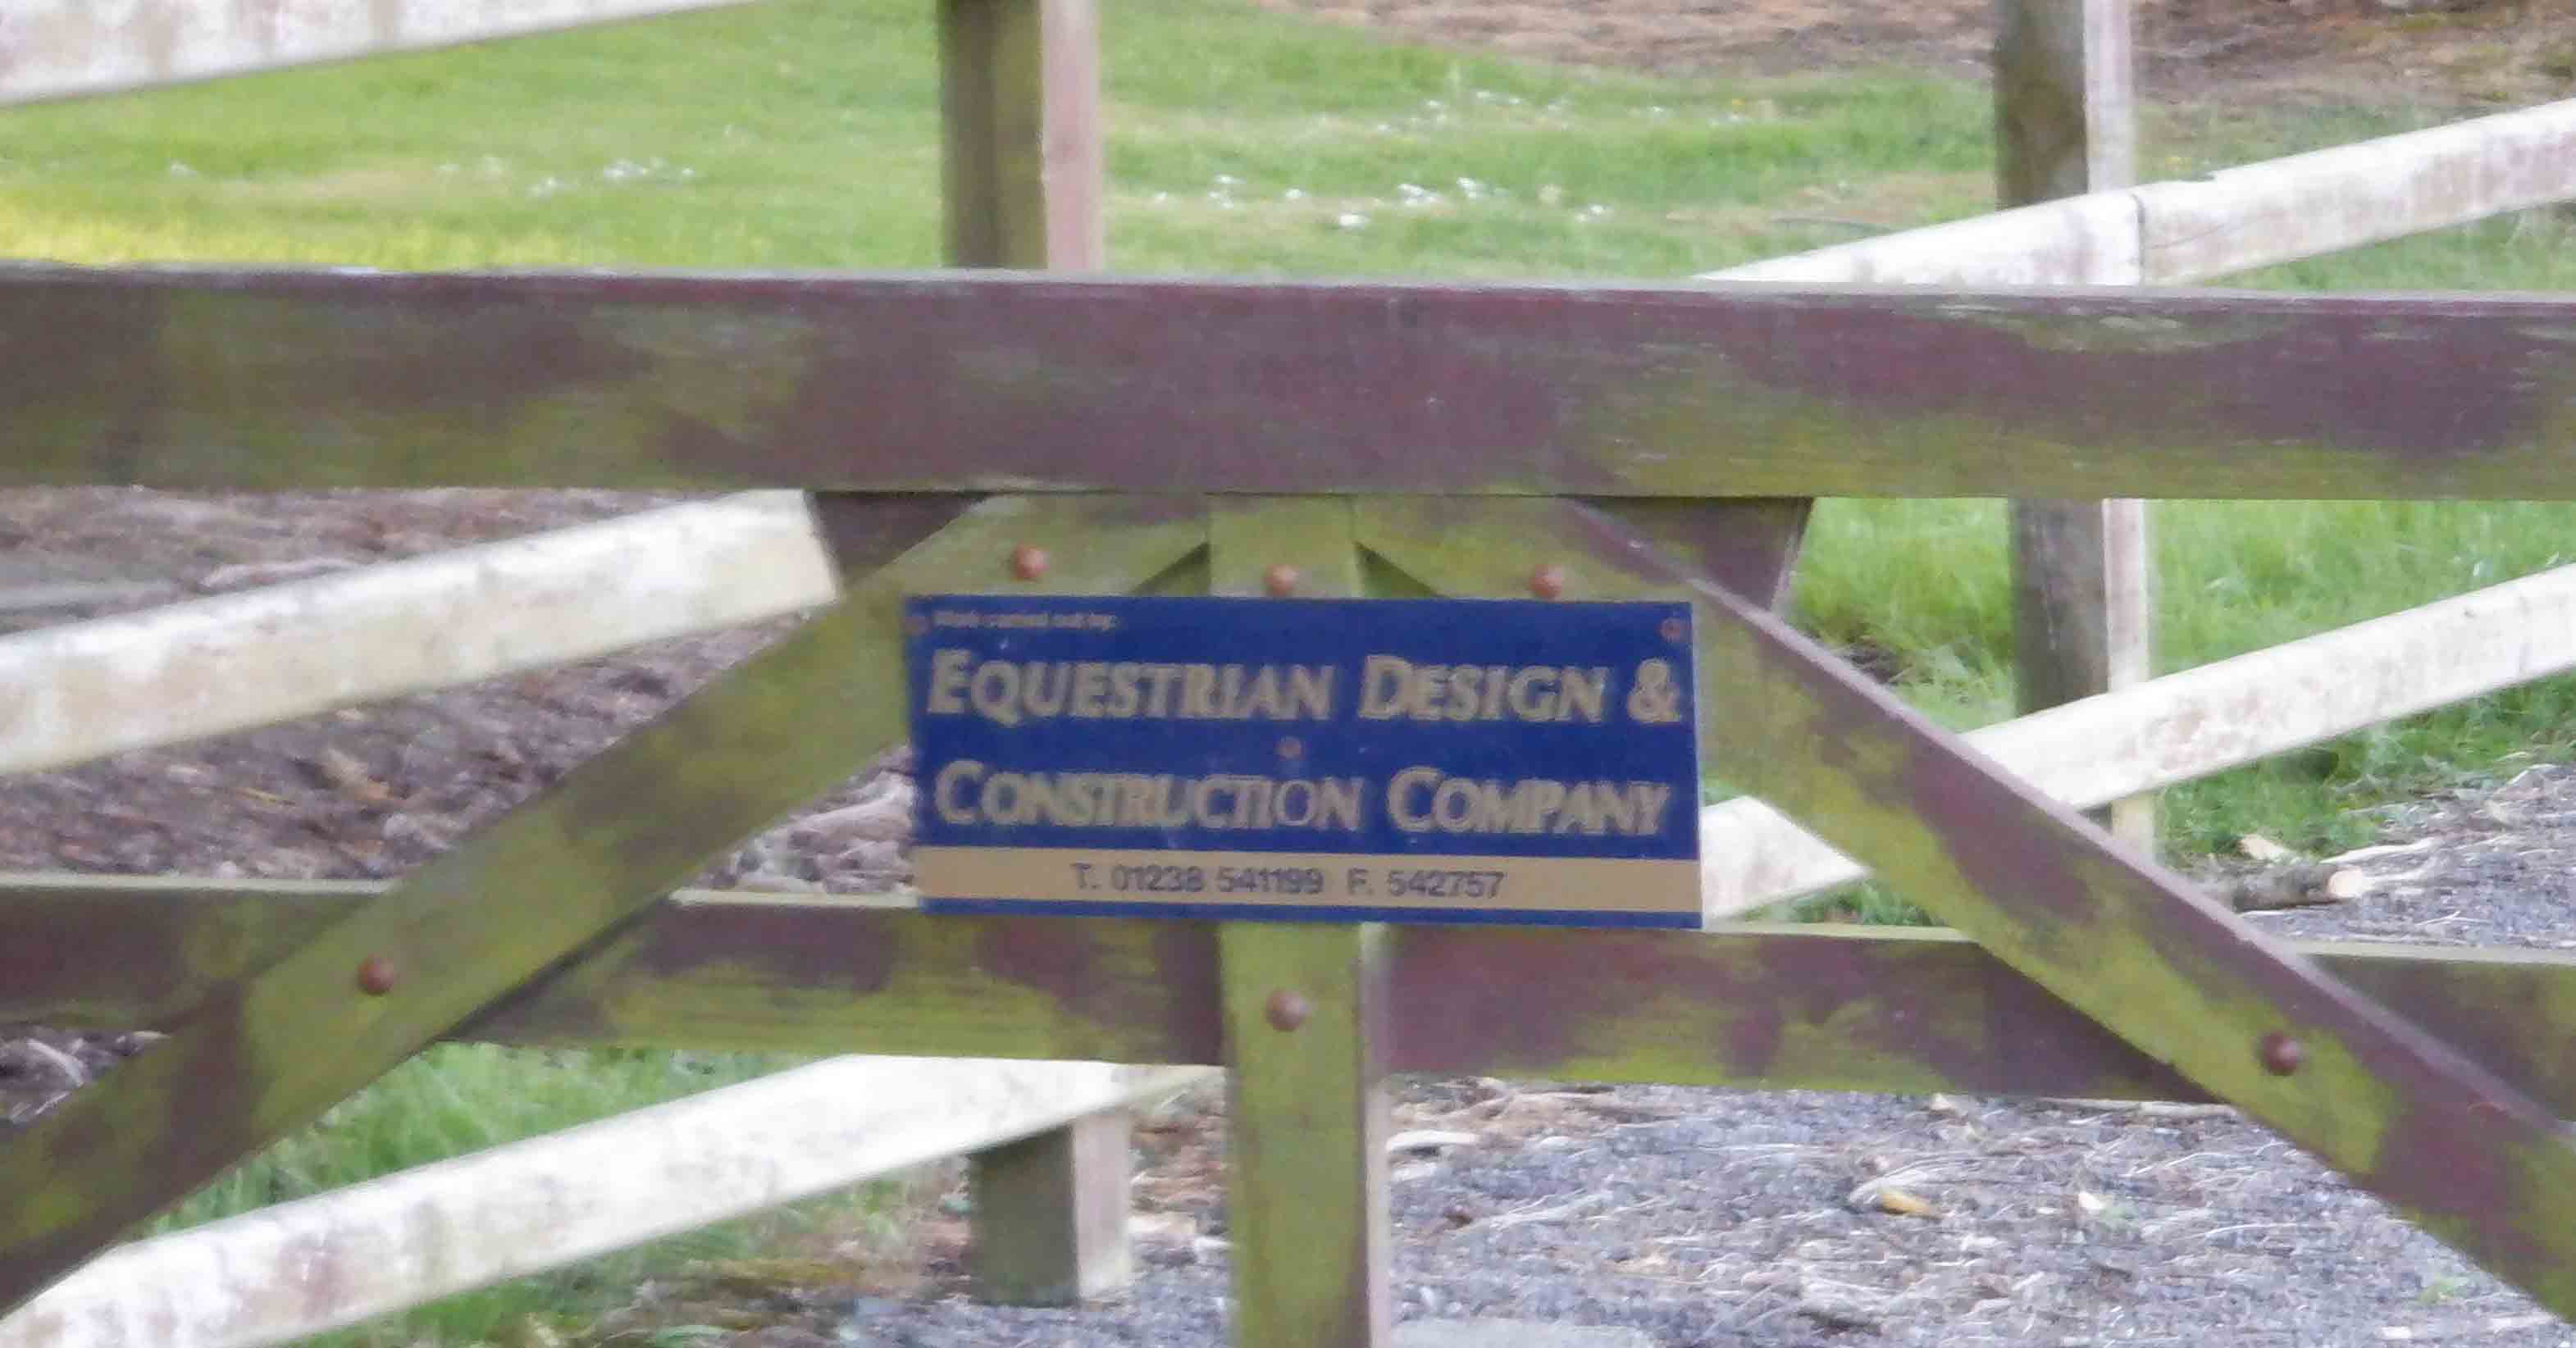 What is the (F)ax number for the Equestrian Design and Construction Company?